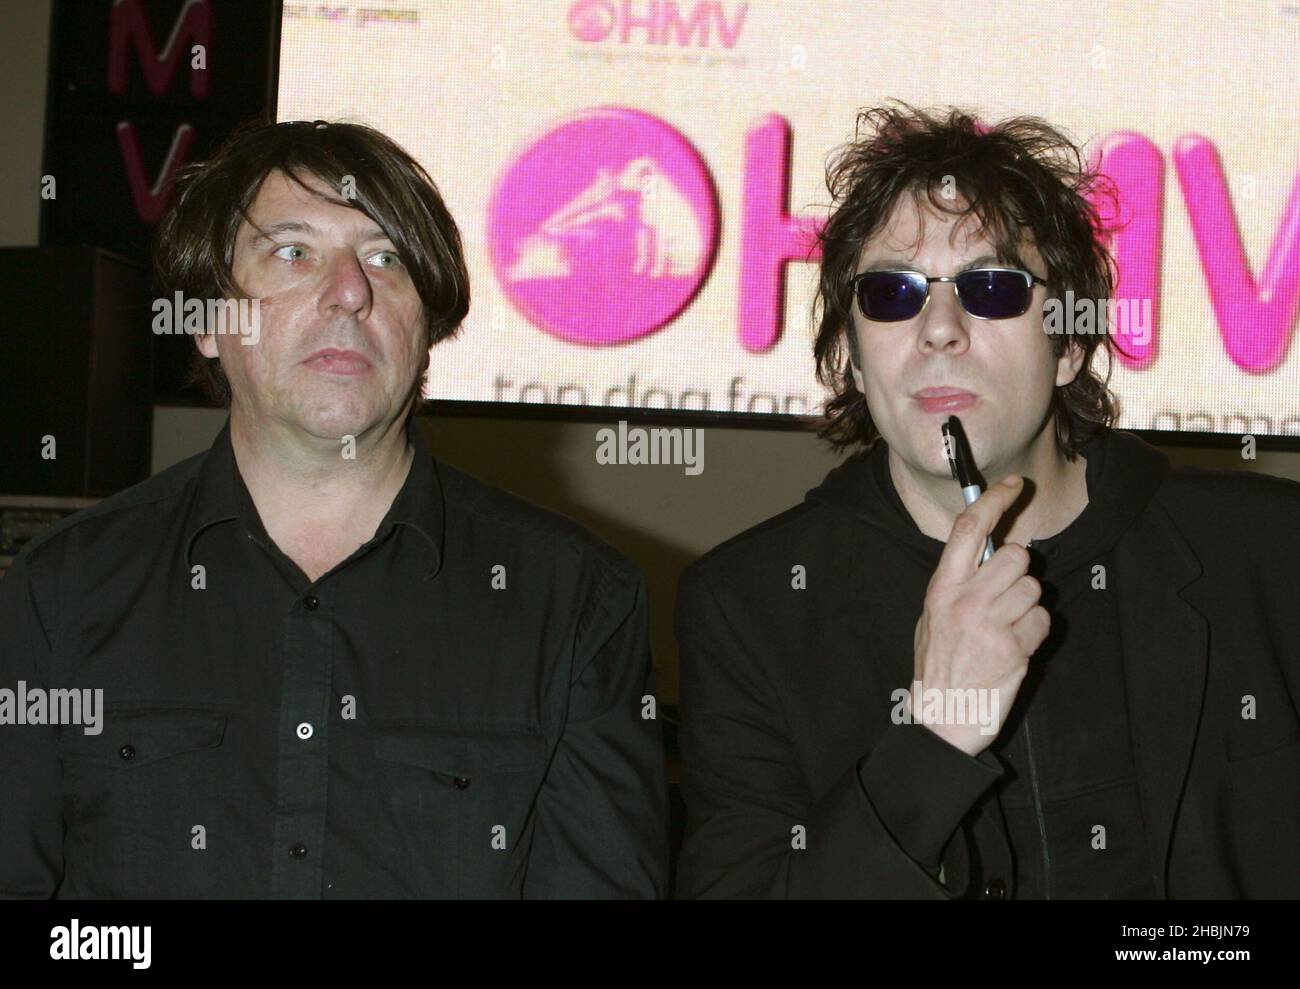 Ian McCulloch and Will Sergeant of Echo and the Bunnymen play an acoustic gig and sign records to celebrate the launch of HMV's digital download service at HMV on Oxford Street, London. Stock Photo